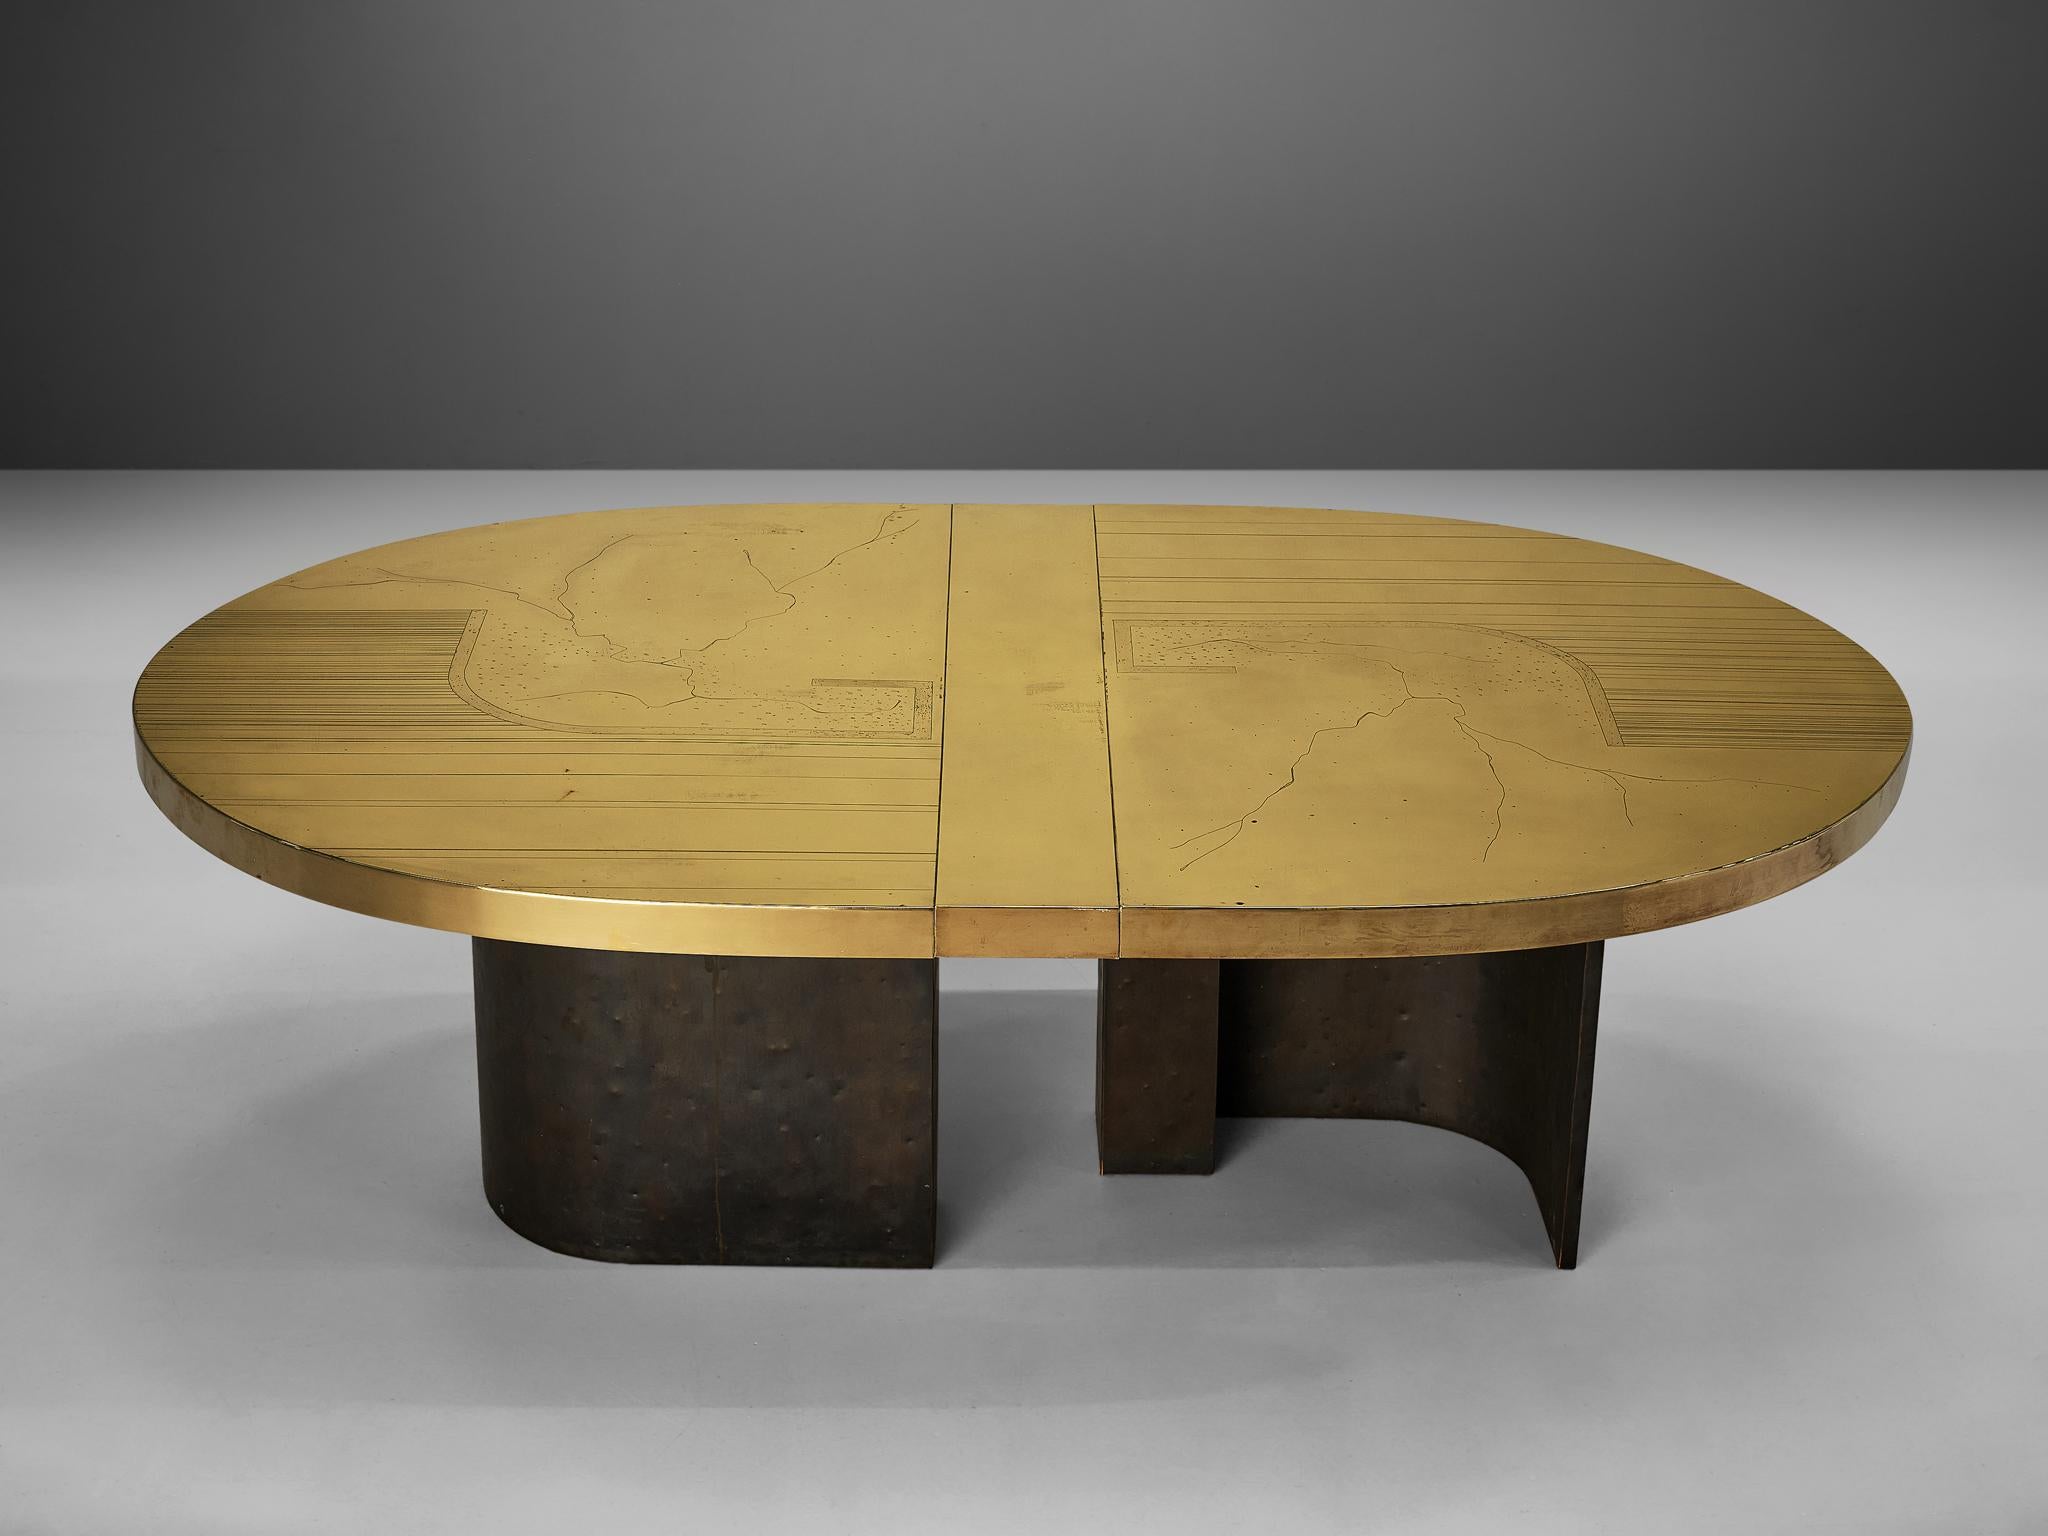 Oval dining table, brass, metal, wood, Belgium 1970s

This grand dining table features a uniquely etched tabletop in brass. Straight and organic lines together create an abstract piece of art, etched into the top. The oval top perfectly matches the